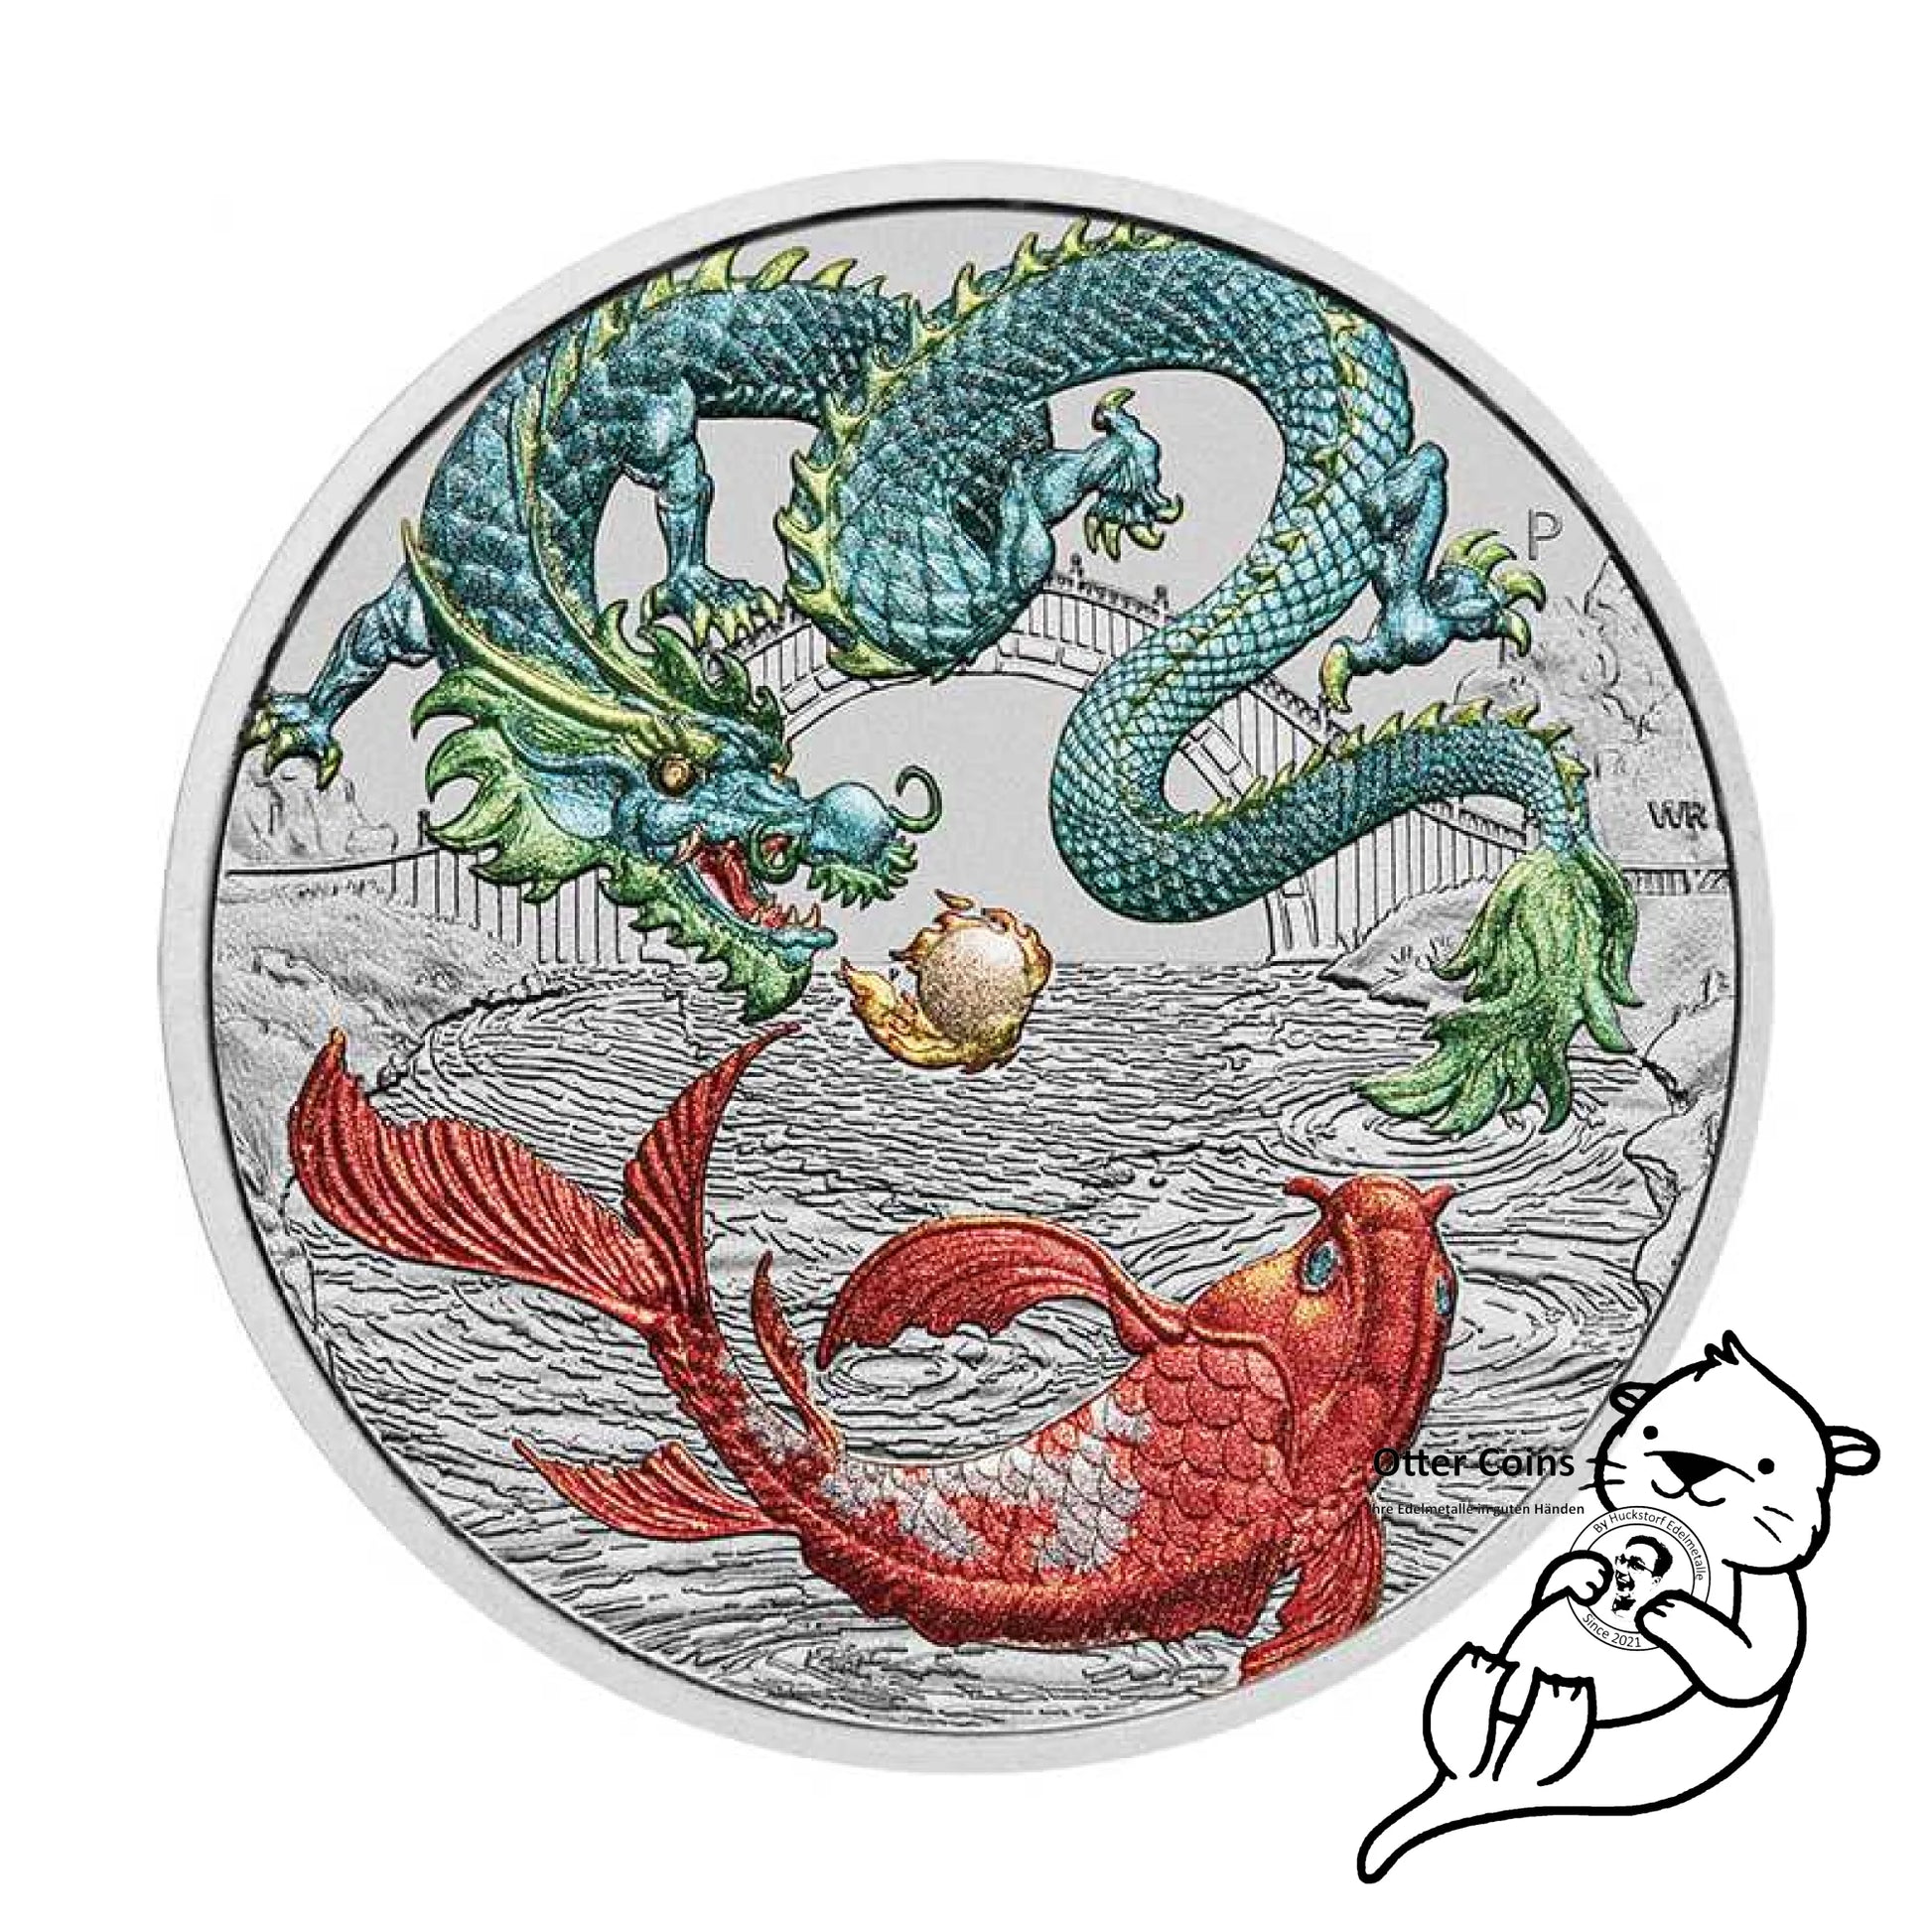 Chinese Myths and Legends - Drache & Koi Coloured Green